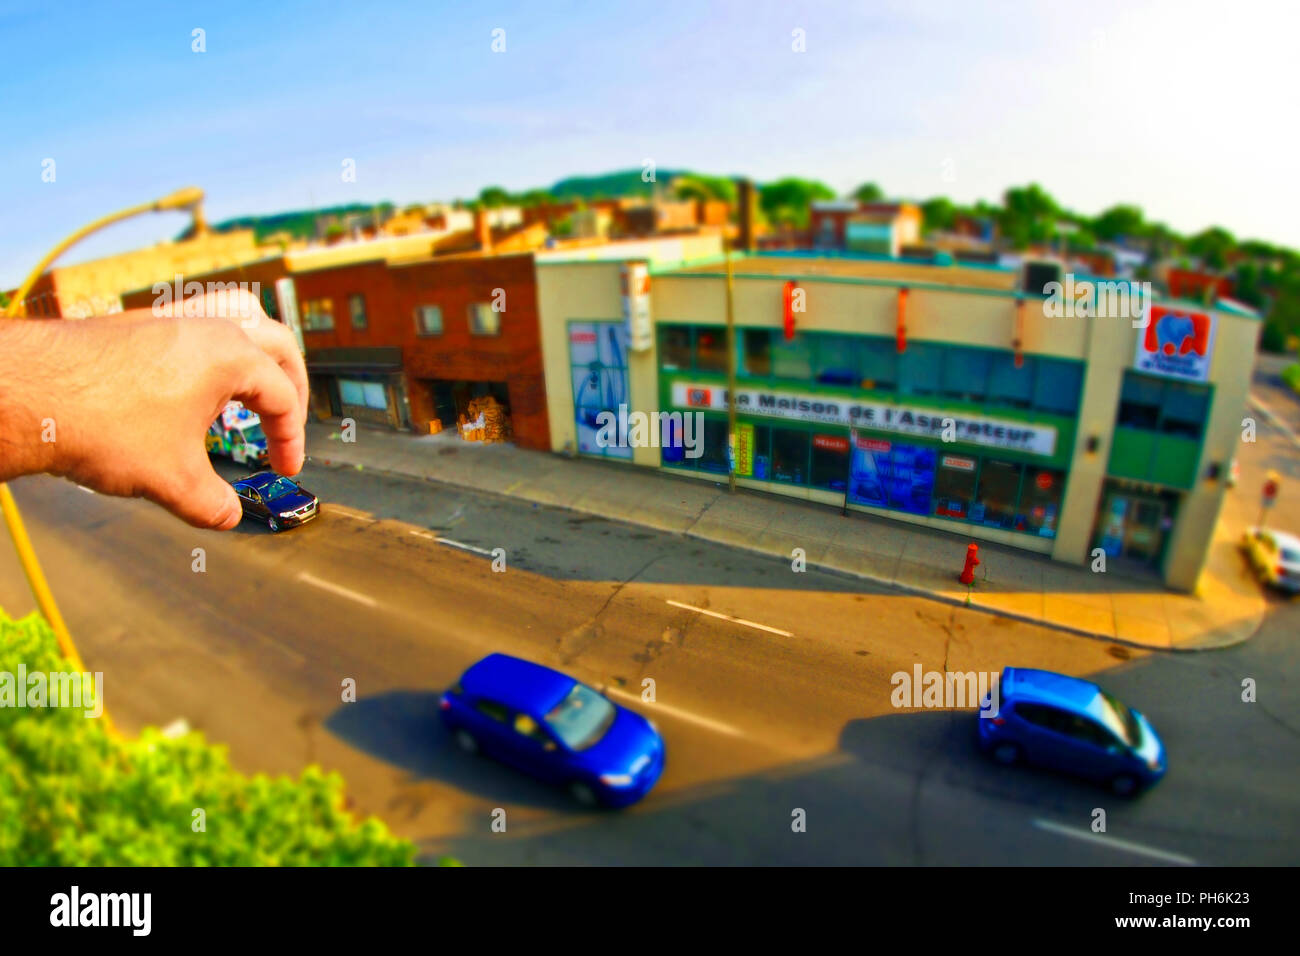 street photo hands of god takin a blue car diorama special effects perspective shot fun toys funny photo miniature effects effect Stock Photo